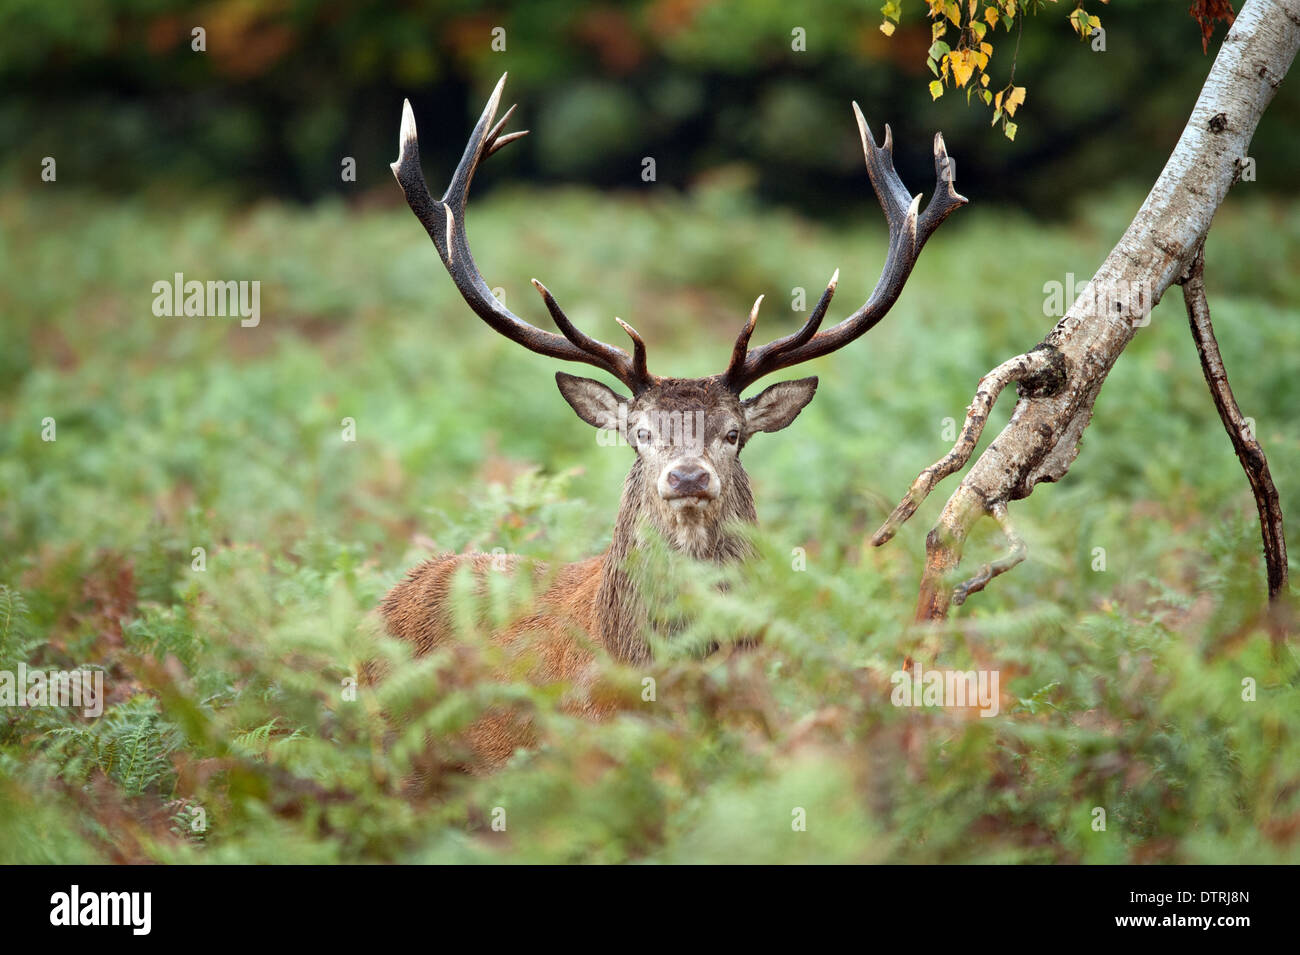 Eye to eye with an impressive red deer Stock Photo